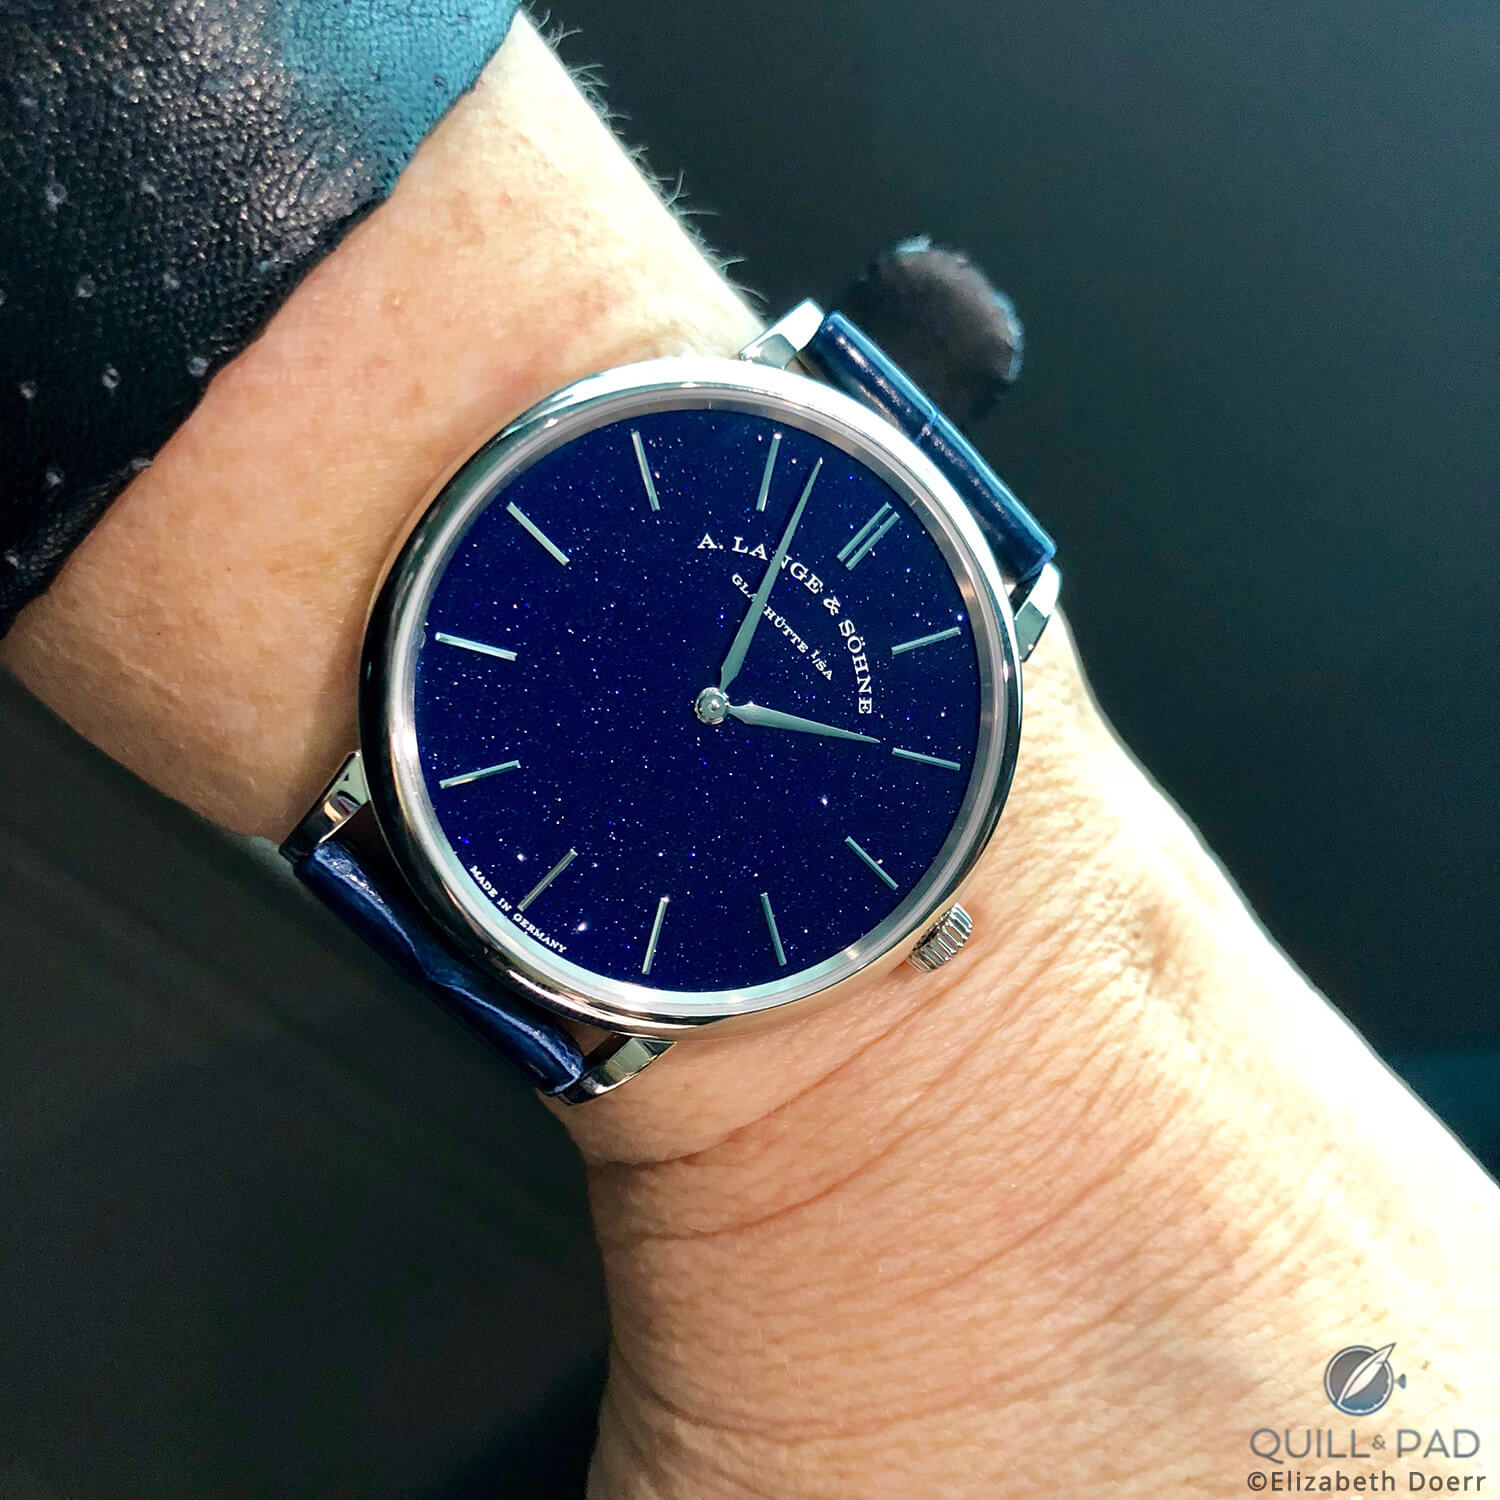 Lange & Söhne introduced a very surprising model at SIHH 2018: the Saxonia Thin with aventurine dial.